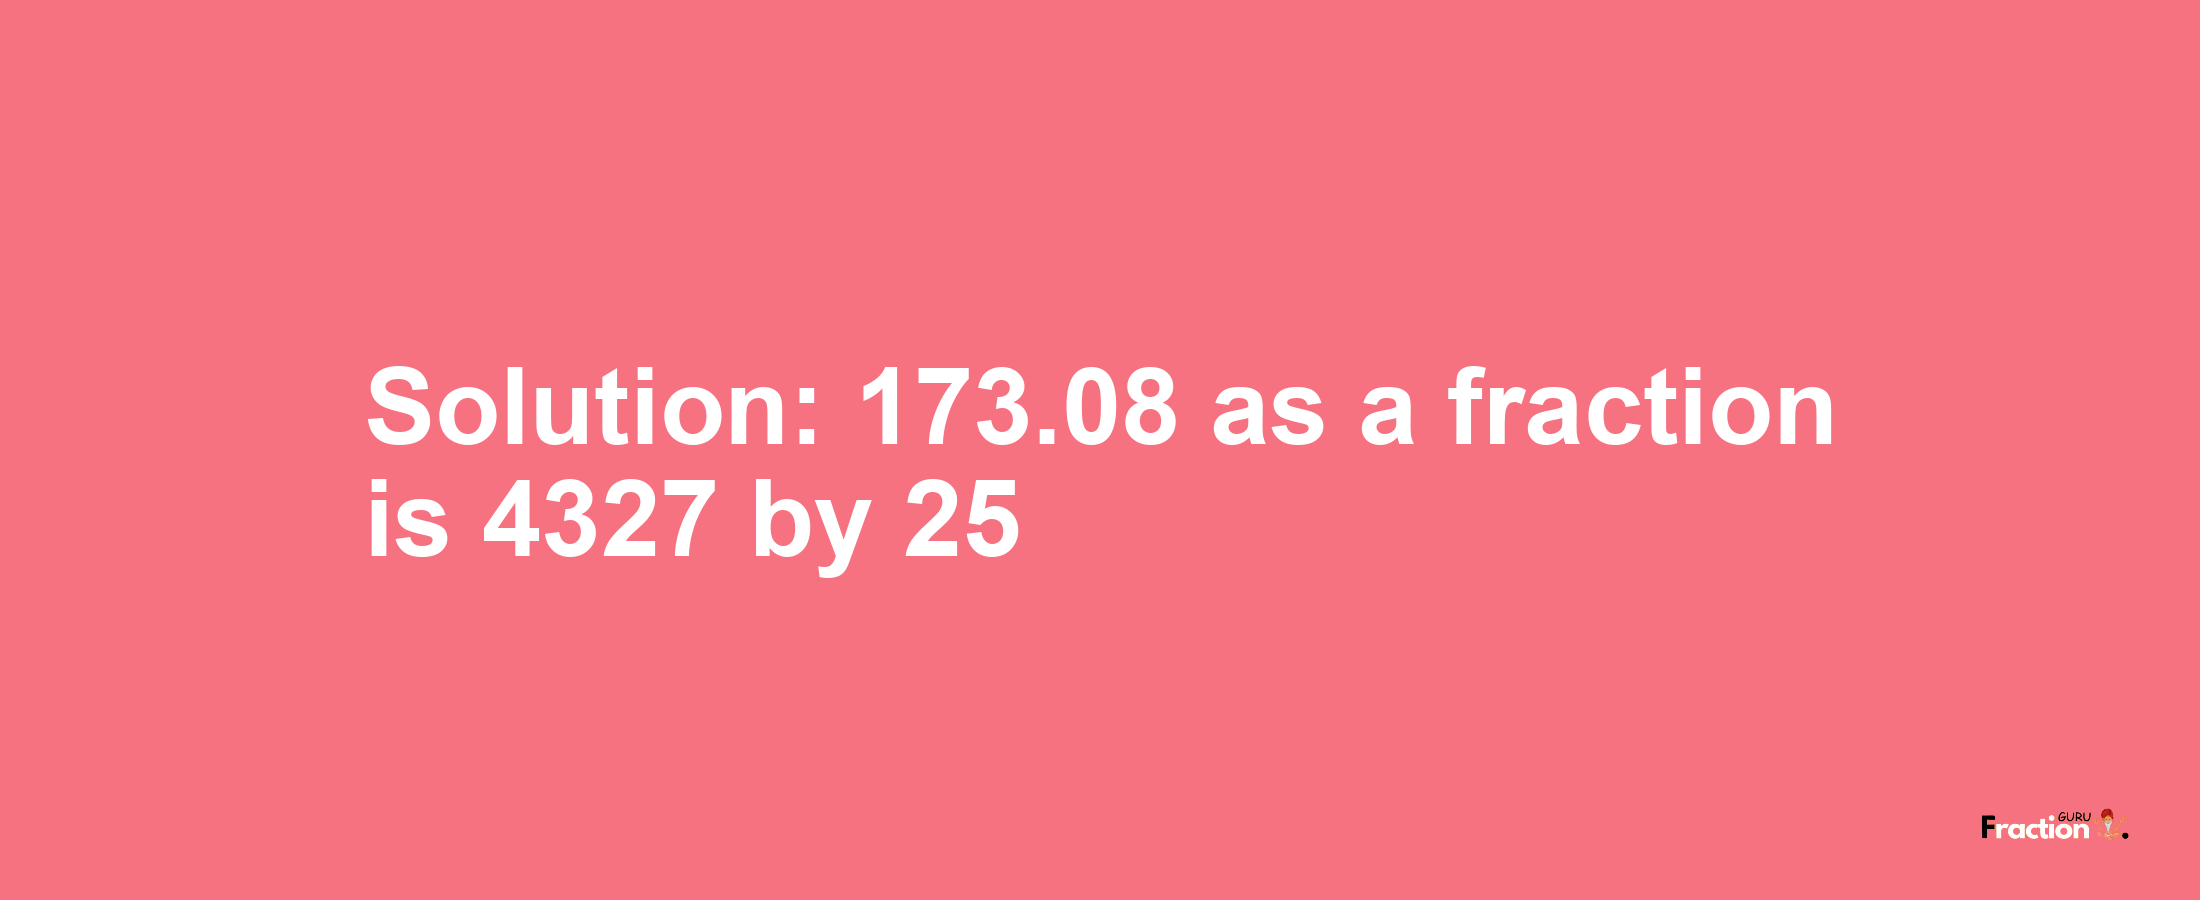 Solution:173.08 as a fraction is 4327/25